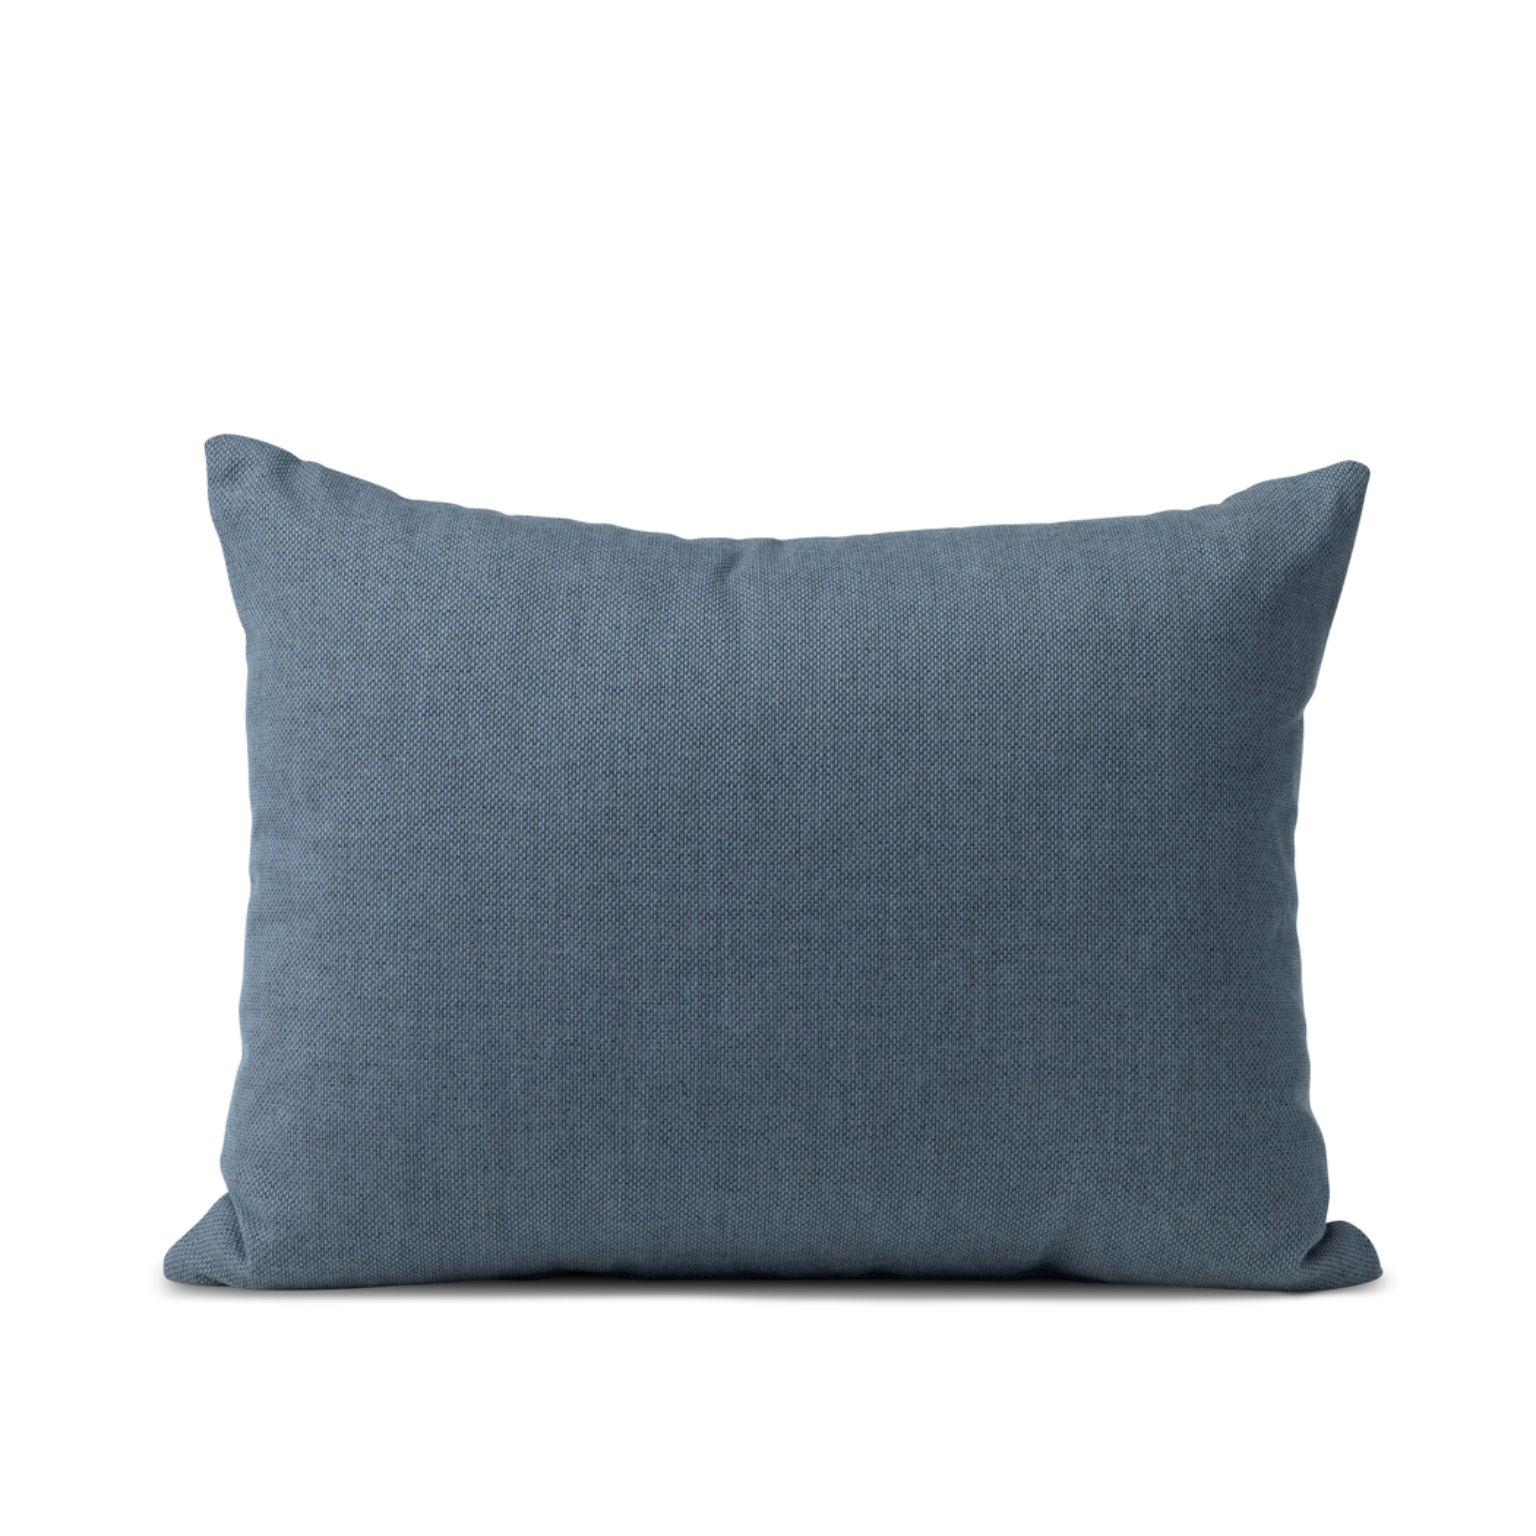 Galore cushion square light steel blue by Warm Nordic.
Dimensions: W 70 x D 15 x H 50 cm.
Material: textile upholstery, granulate and feathers filling.
Weight: 1.4 kg
Also available in different colours and finishes. 

An elegant oversized